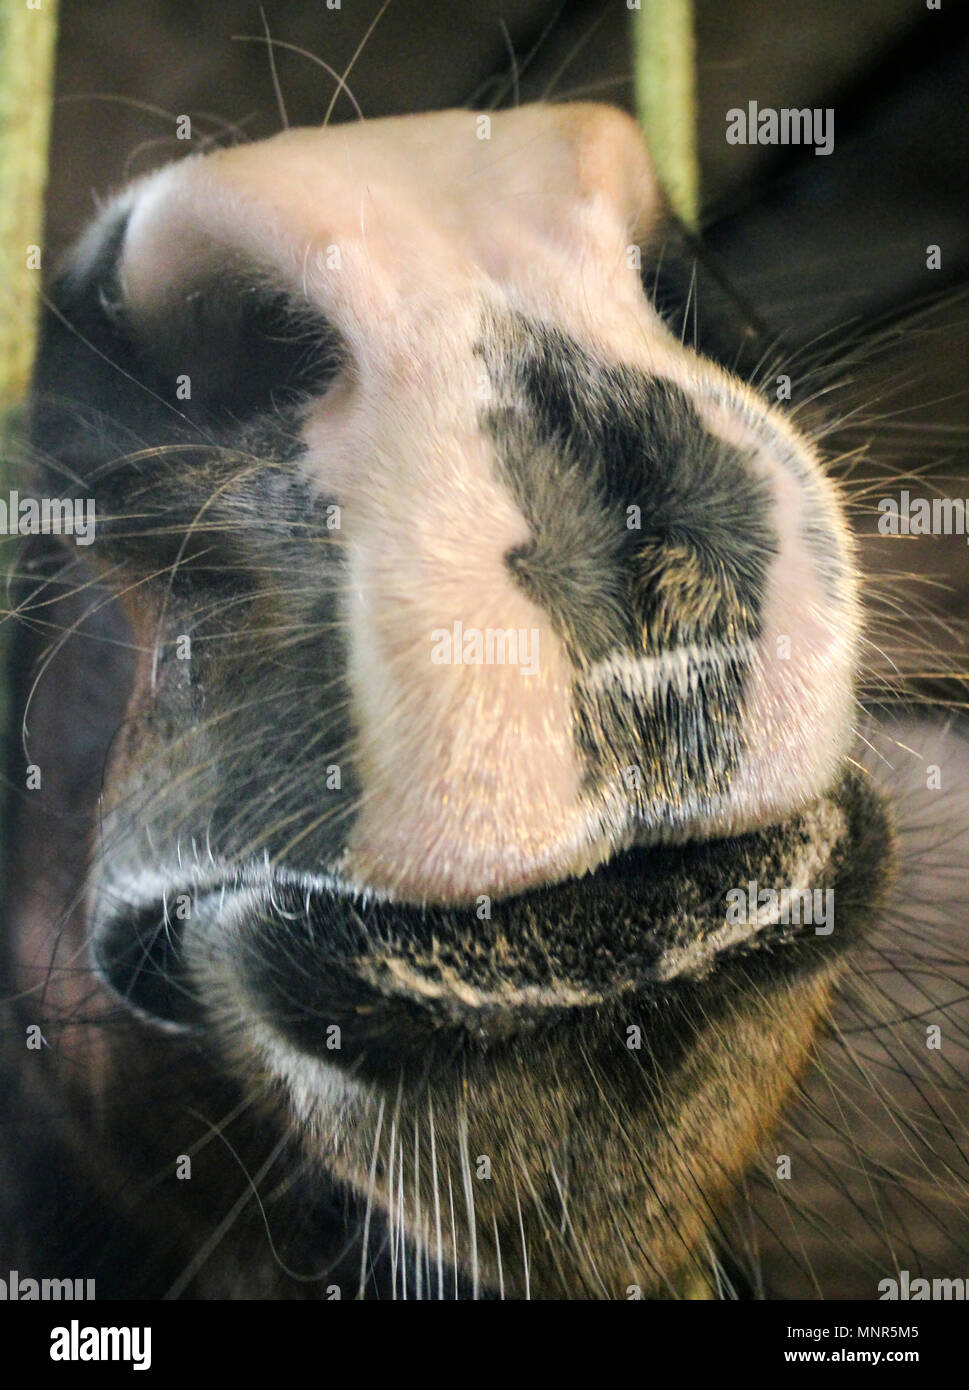 Muzzle of a horse, got out through the bars of the cell, close up Stock Photo